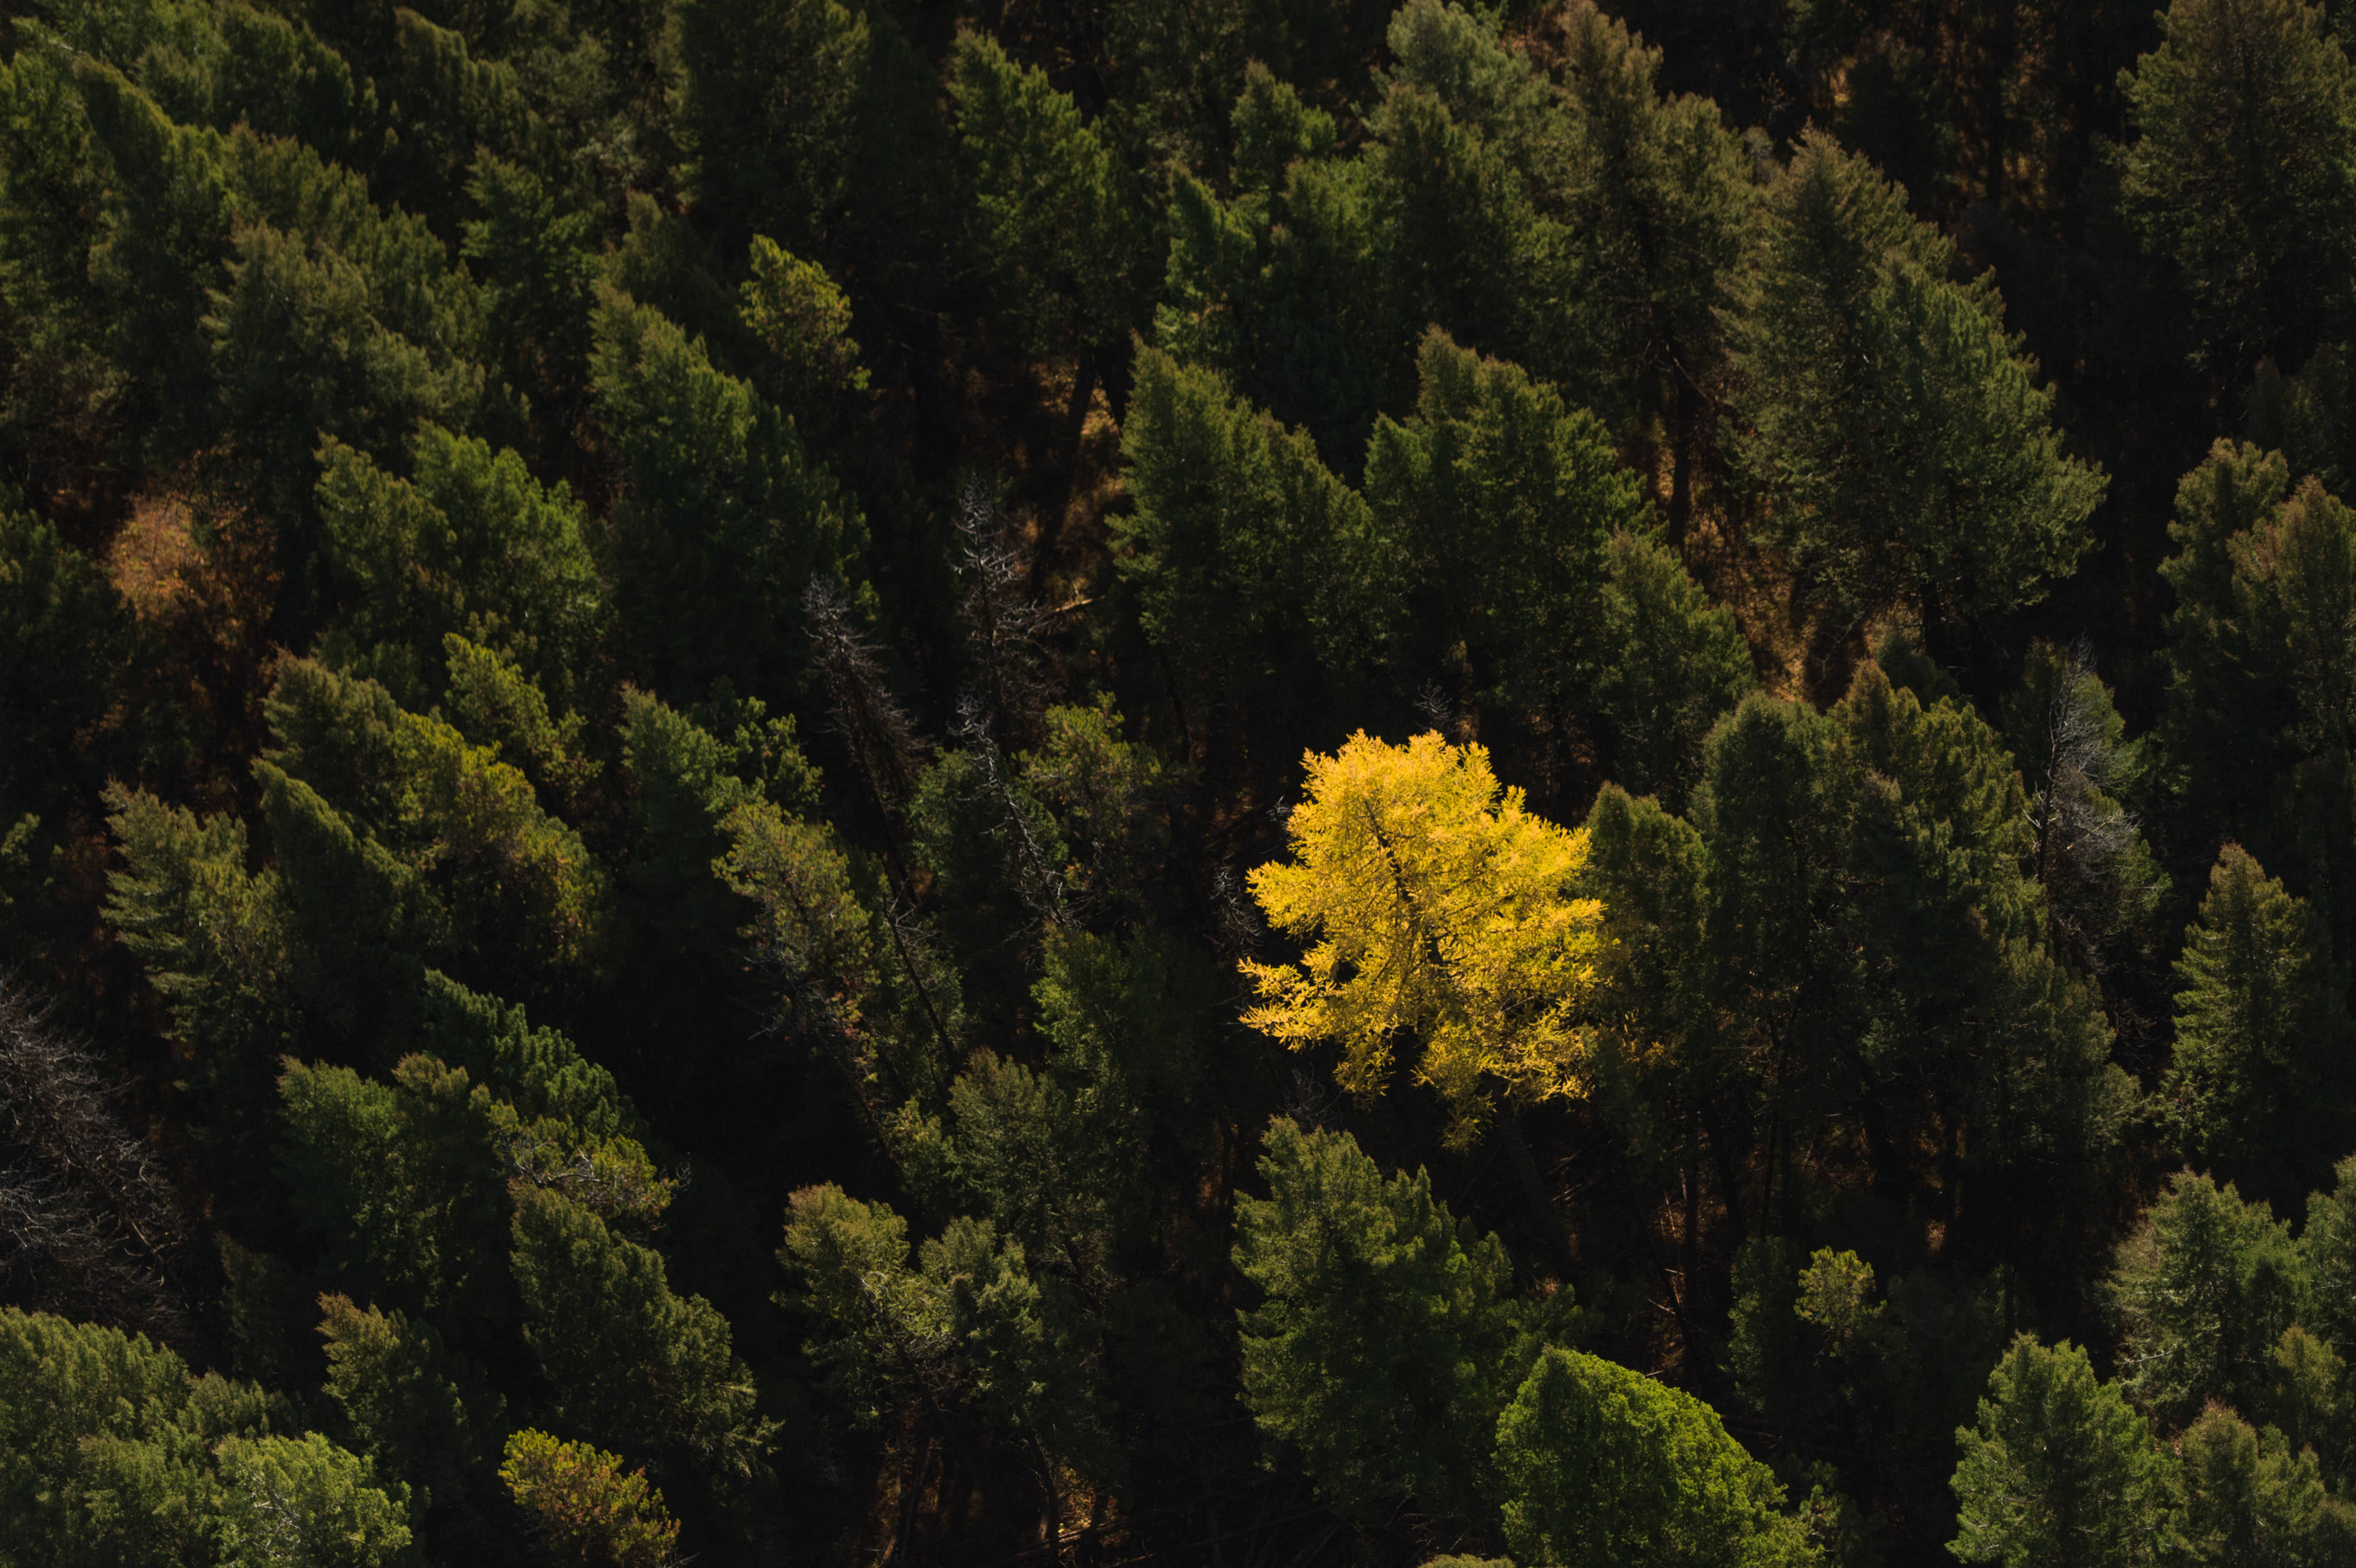 Aerial view of trees in a dense forest.